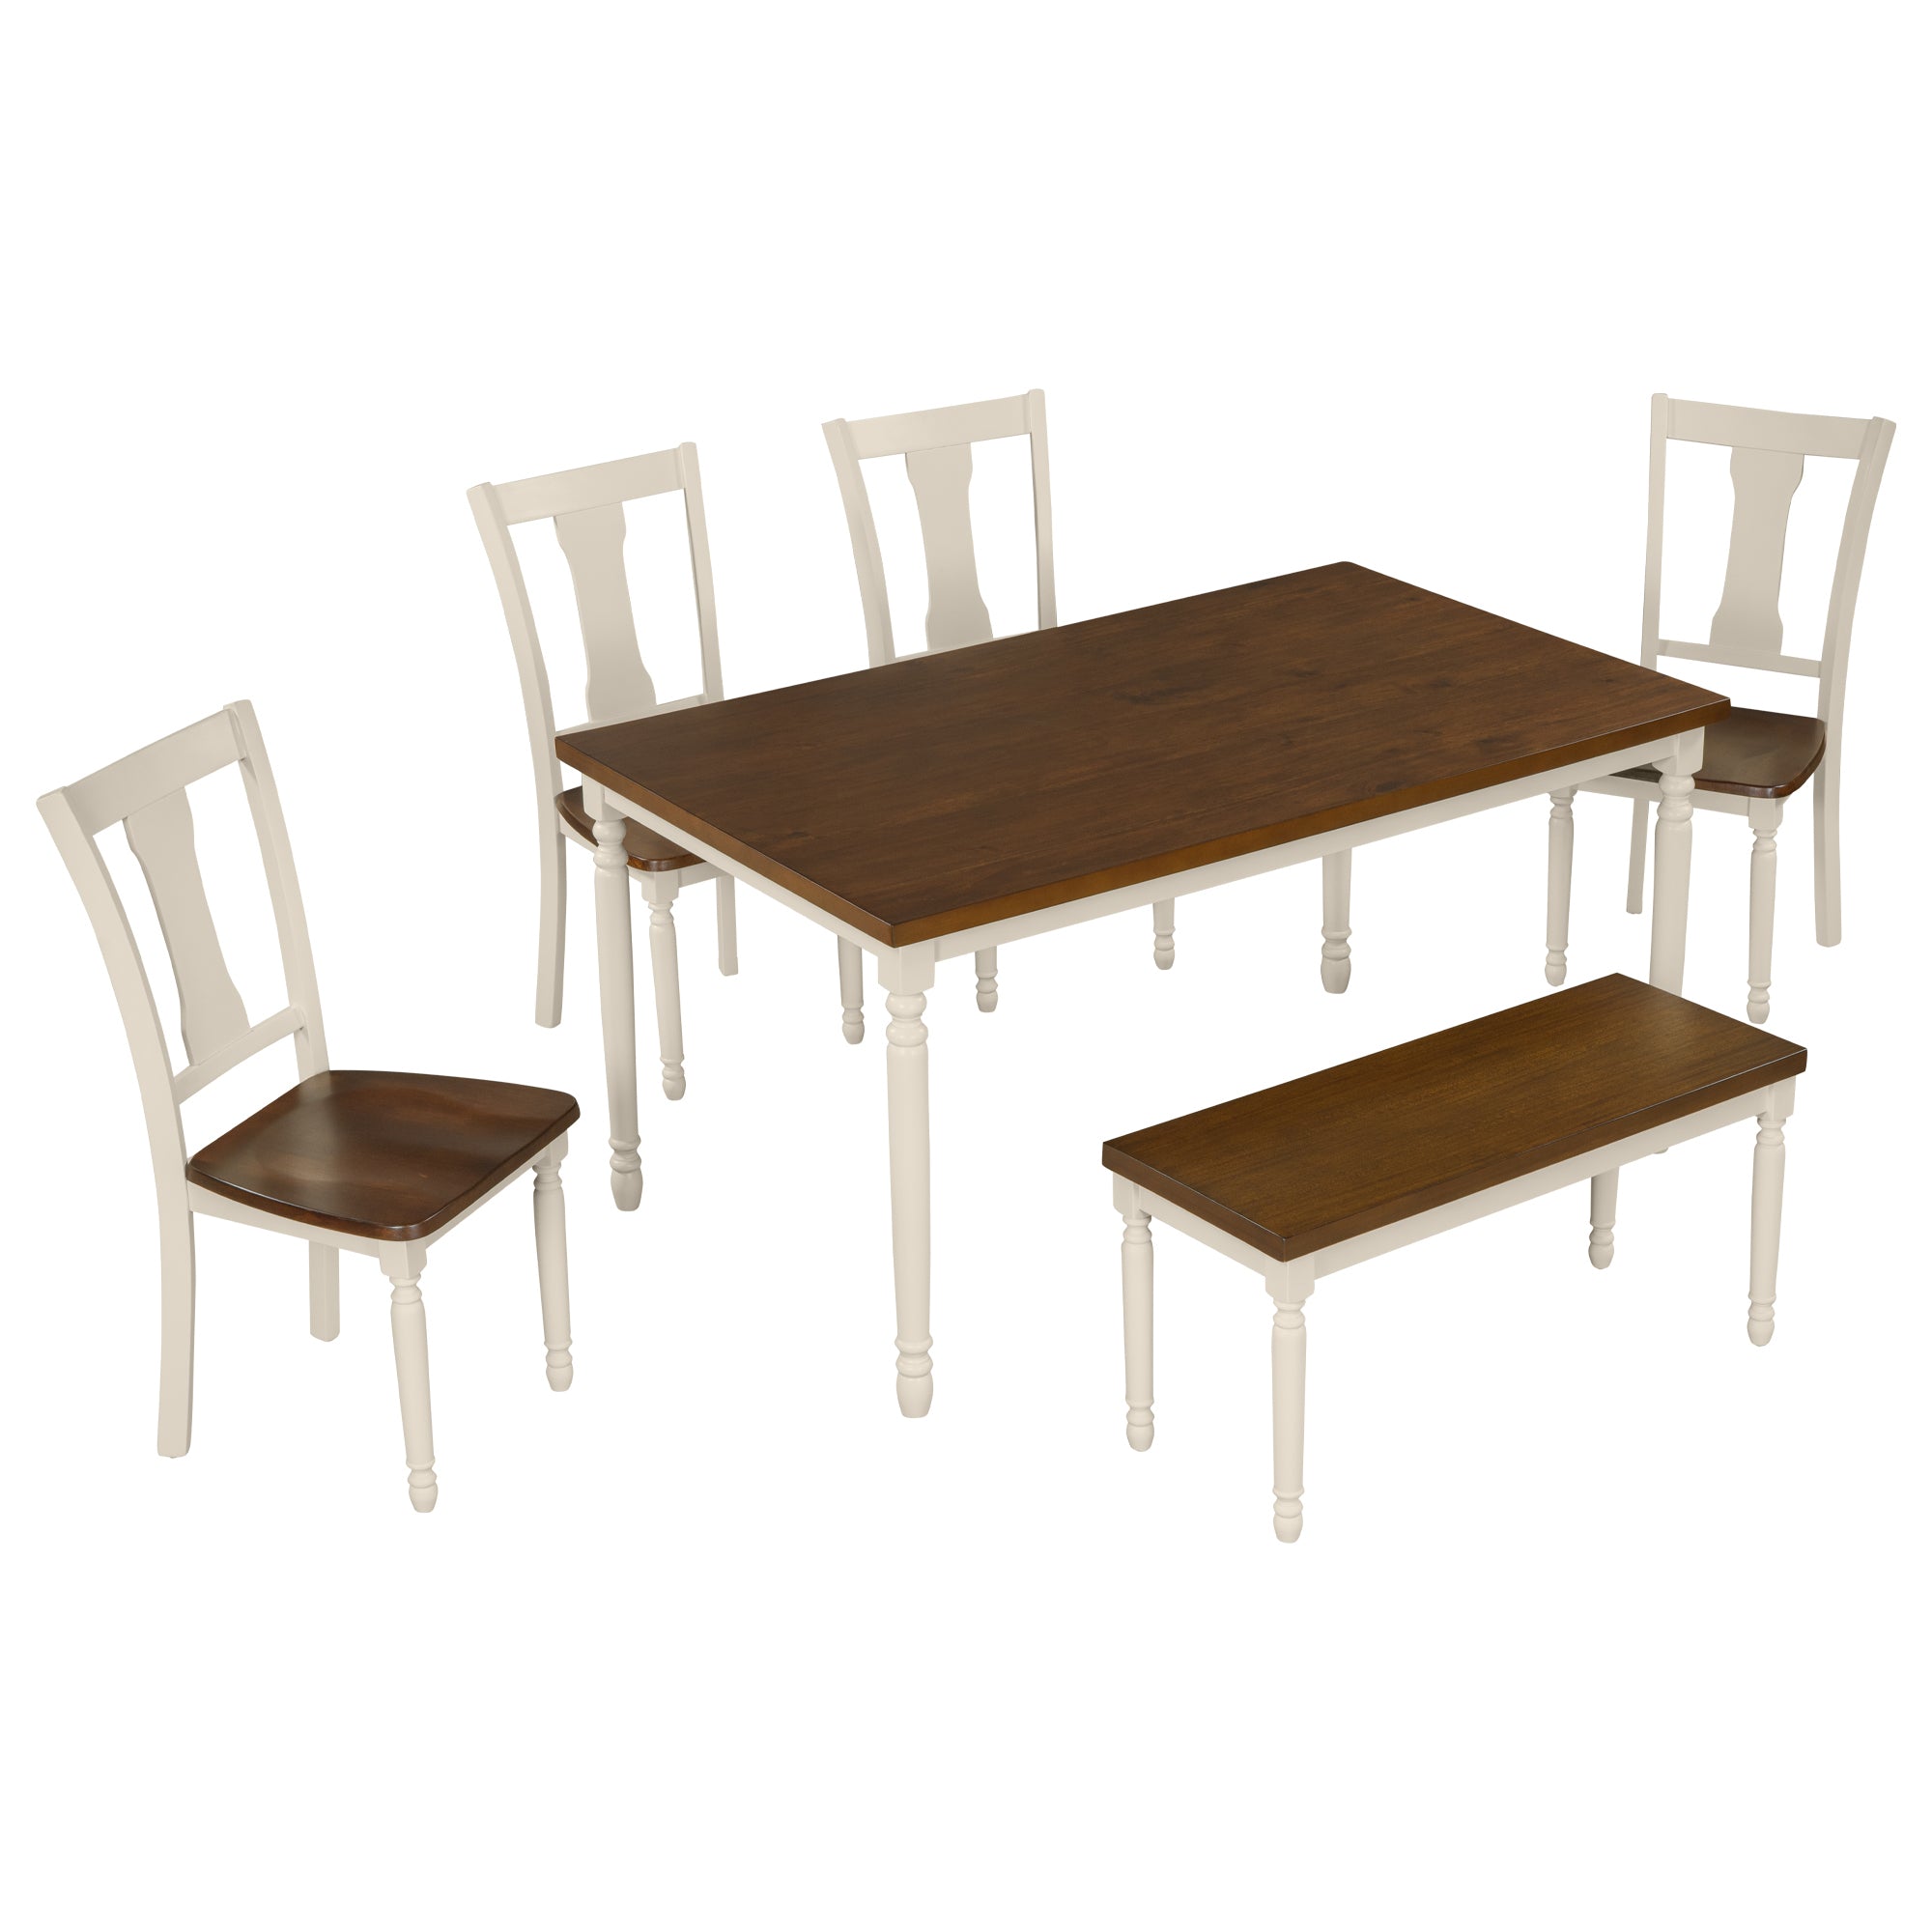 TREXM Classic 6-Piece Dining Set Wooden Table and 4 Chairs with Bench for Kitchen Dining Room (Brown+Cottage White)